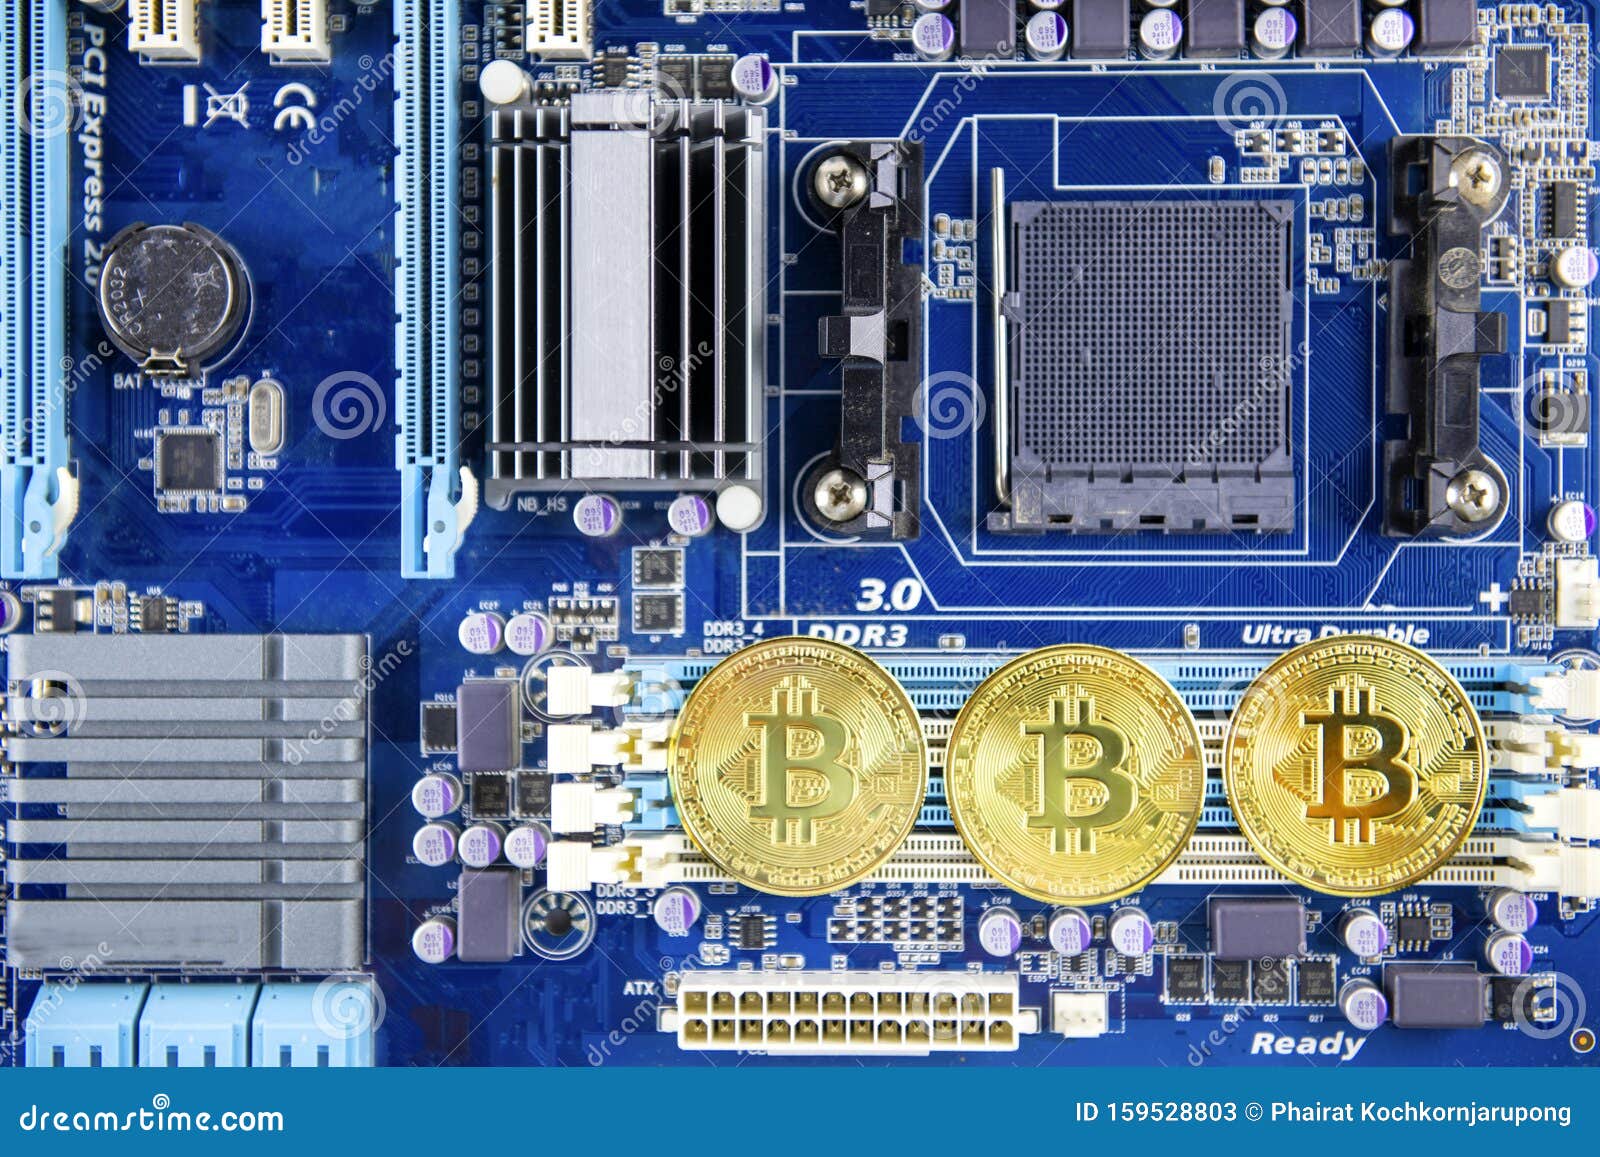 Golden Bitcoin Token Currency Mining Stock Image - Image of computer, background: 159528803